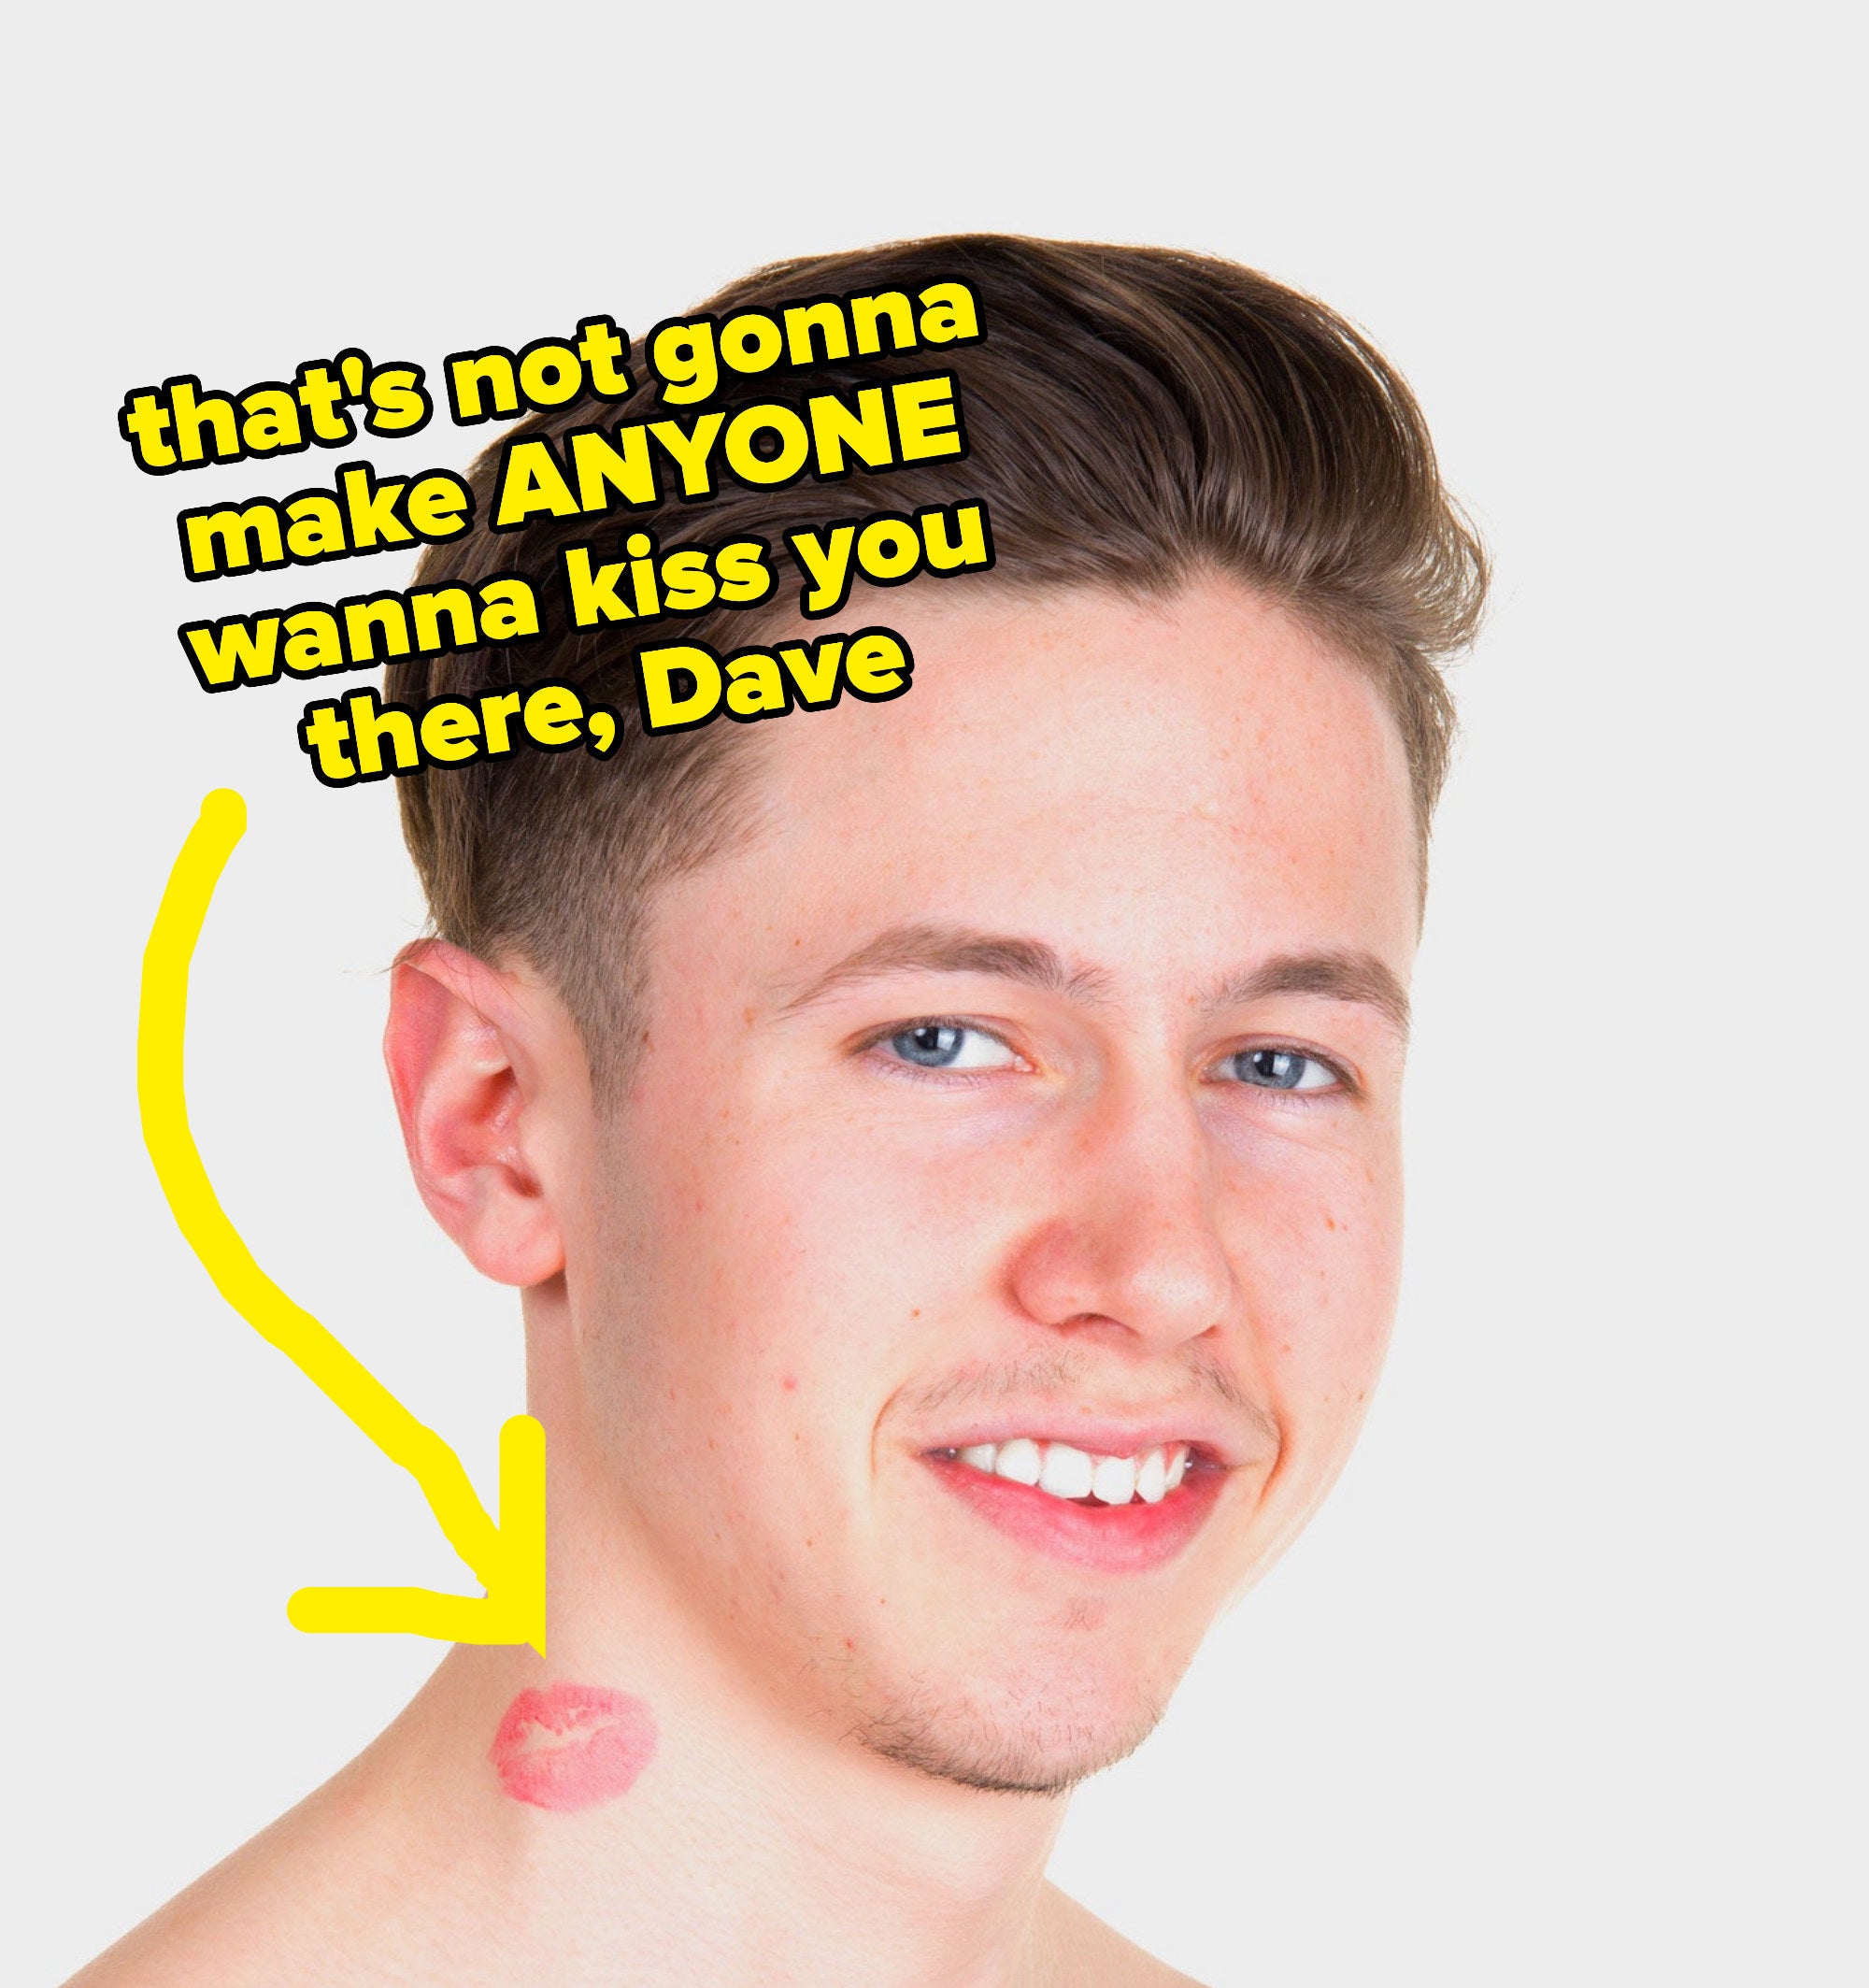 arrow pointing to lips tattoo with text, that&#x27;s not gonna make anyone wanna kiss you there, dave